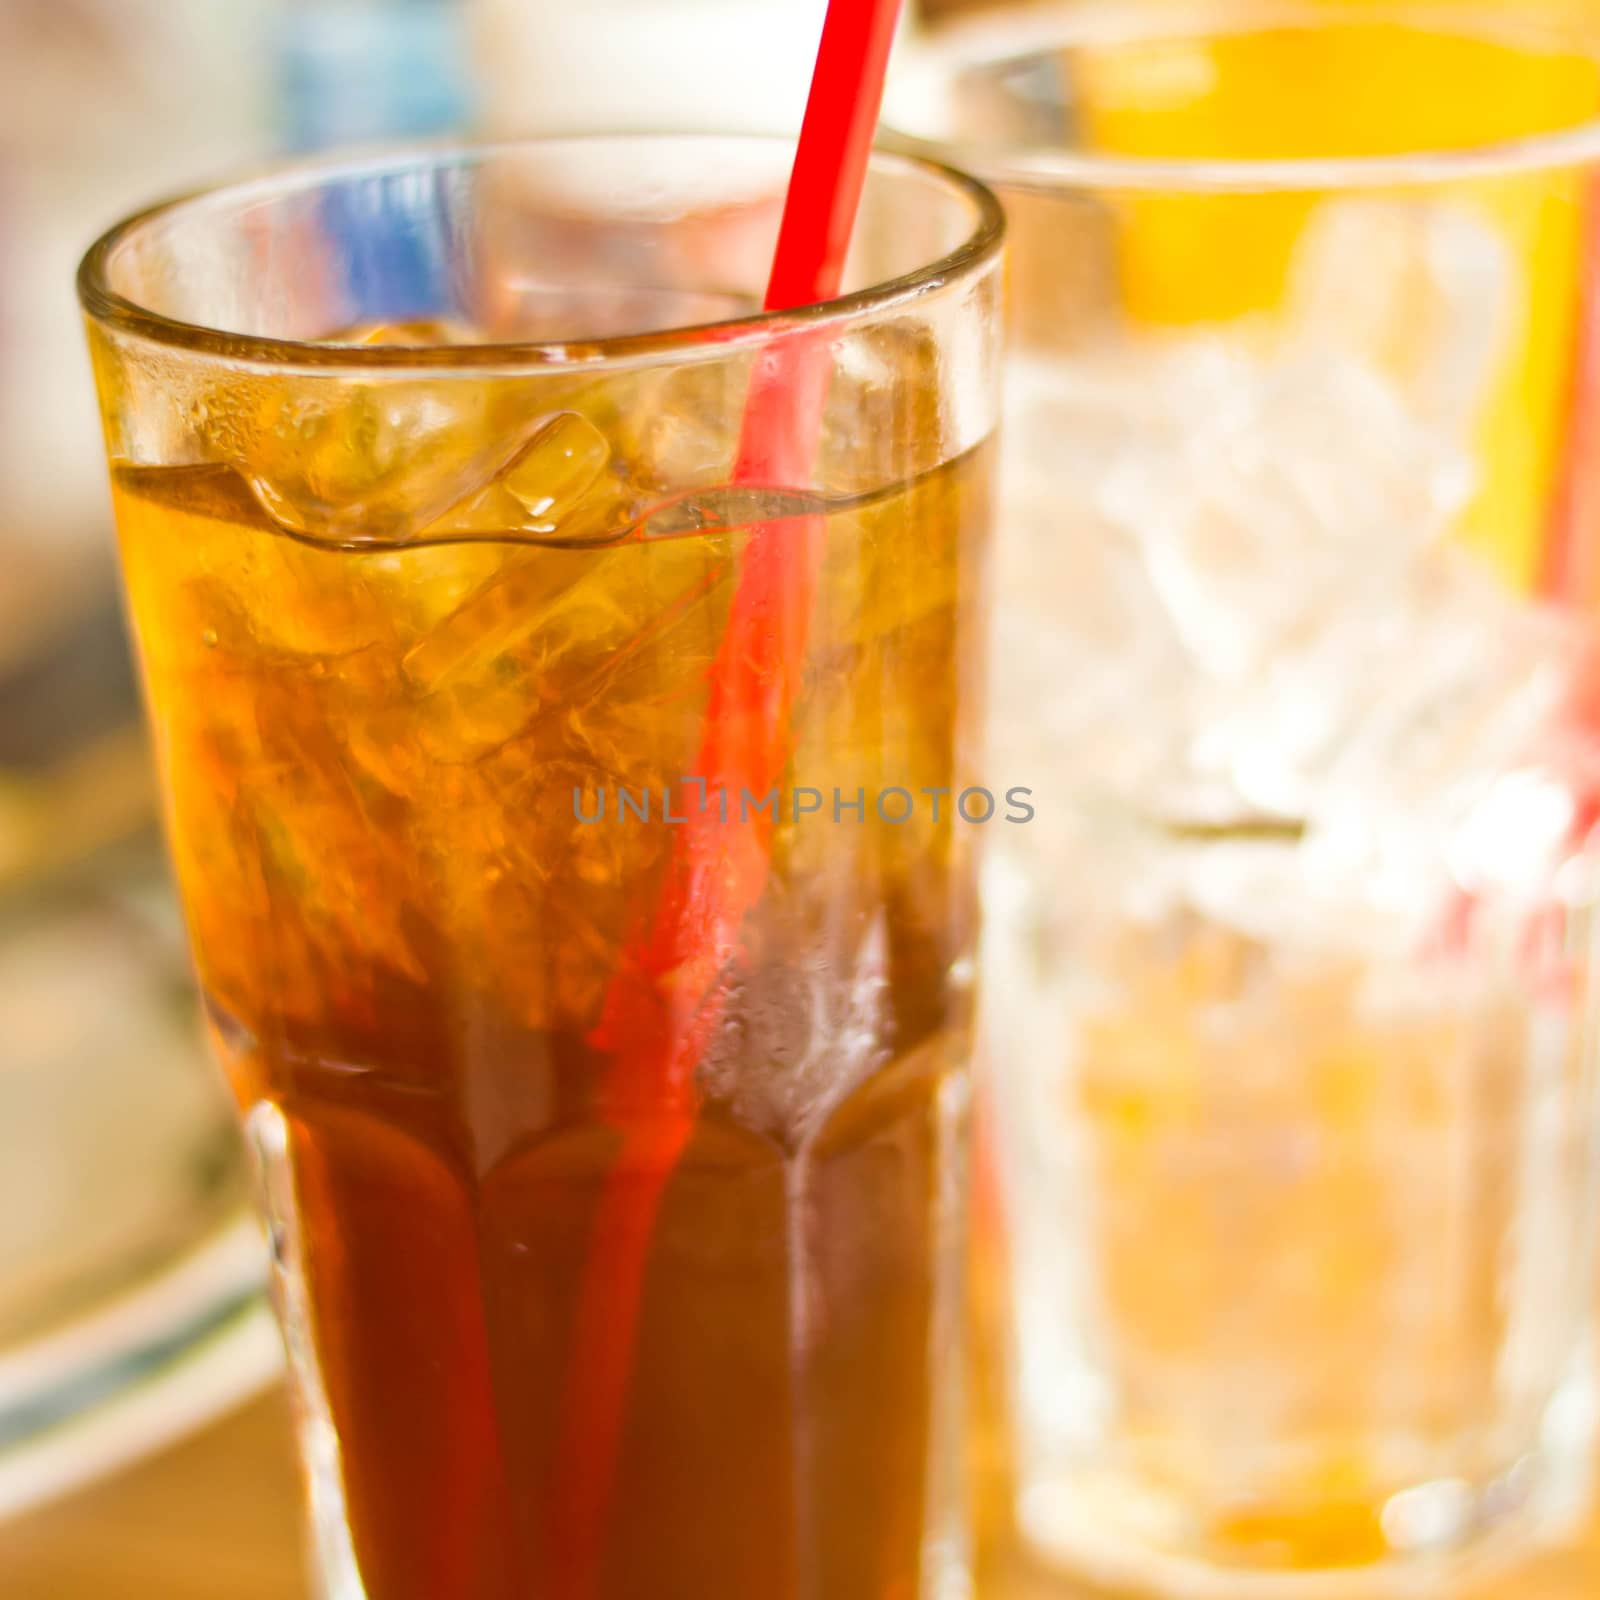 Lemon tea with ice in a glass by Thanamat